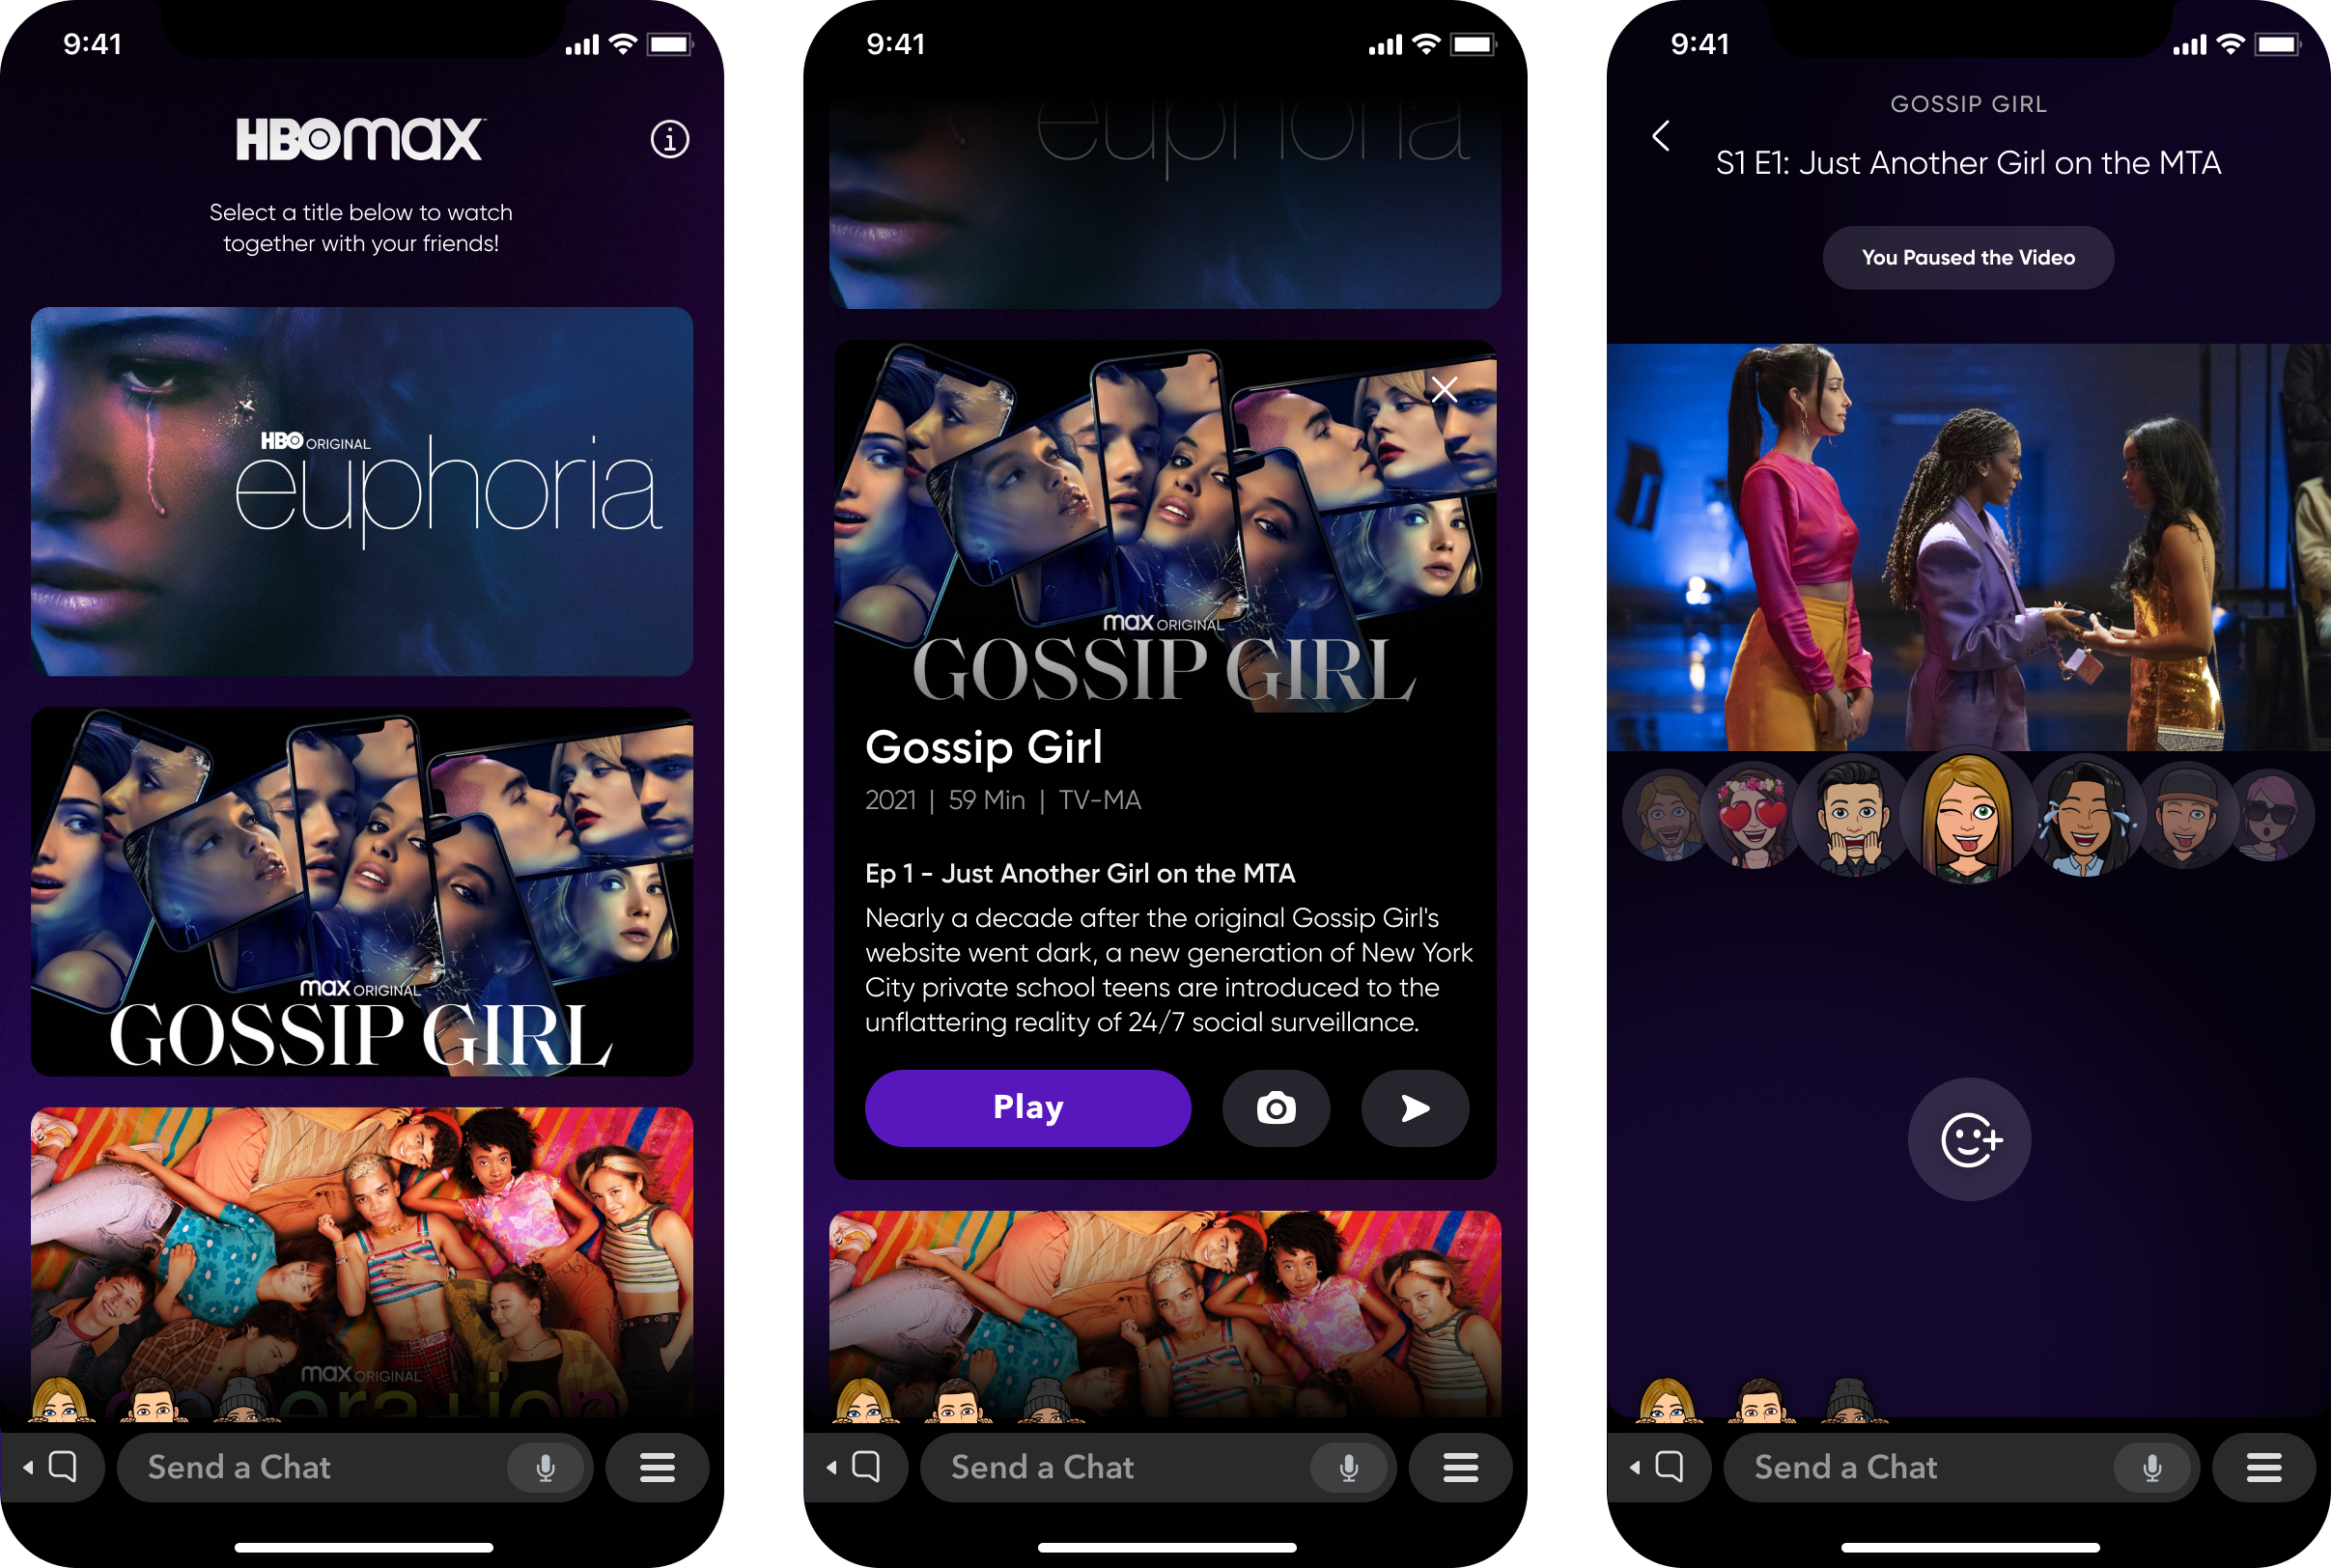 HBO Max just had one of its quarters to date, but app performance still has room improve | TechCrunch